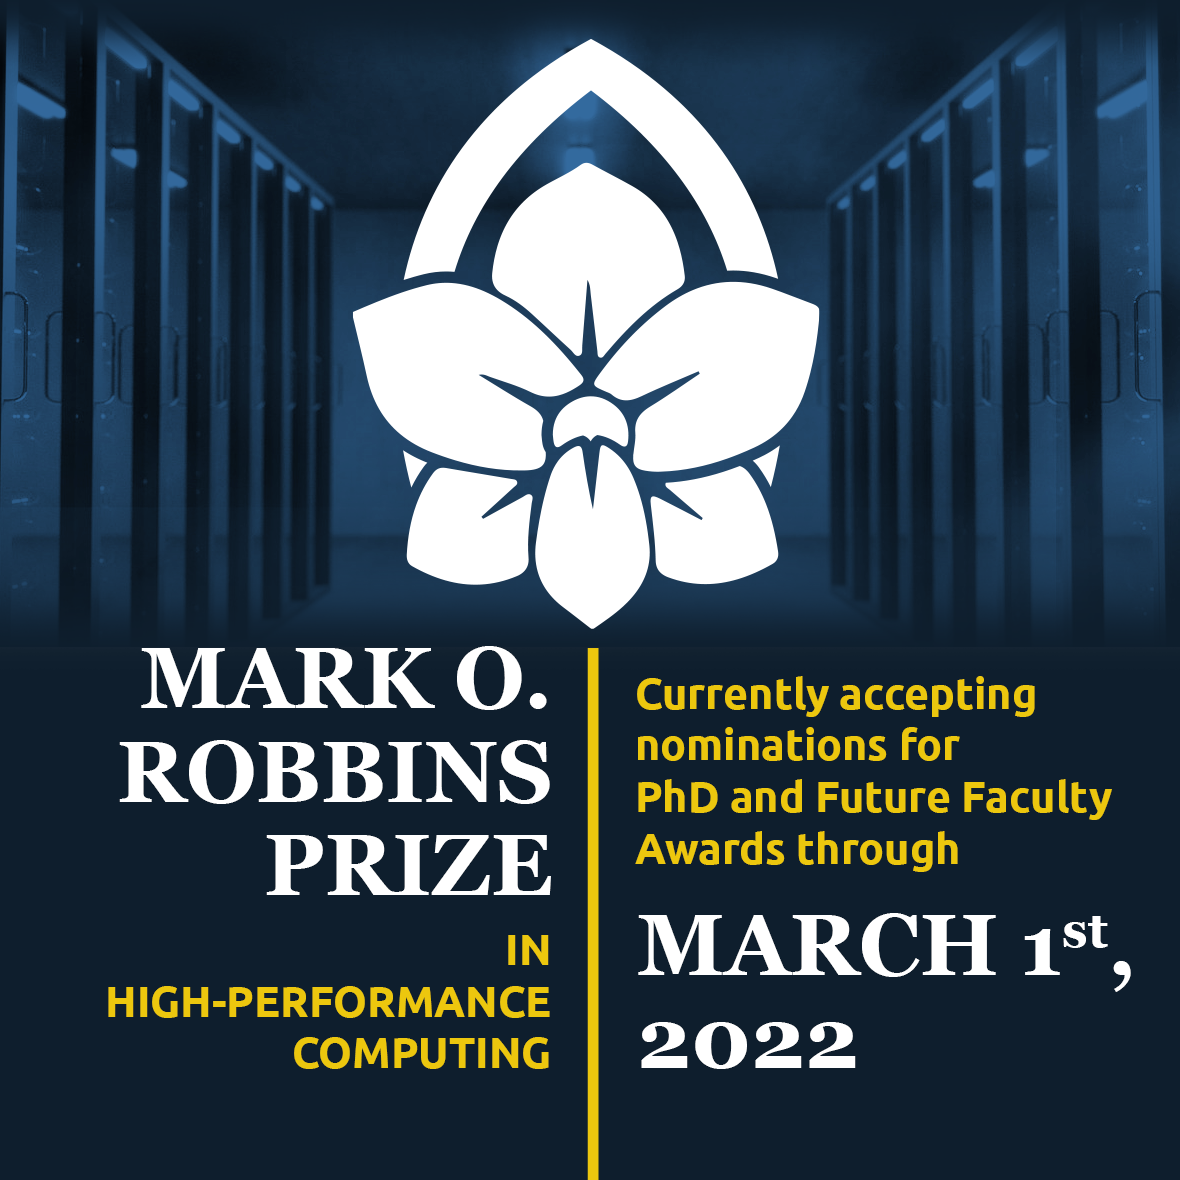 Blue image with white and gold text and white orchid. Text reads Mark O Robbins Prize in high performance computing. Currently accepting nominations through March 1st, 2022/